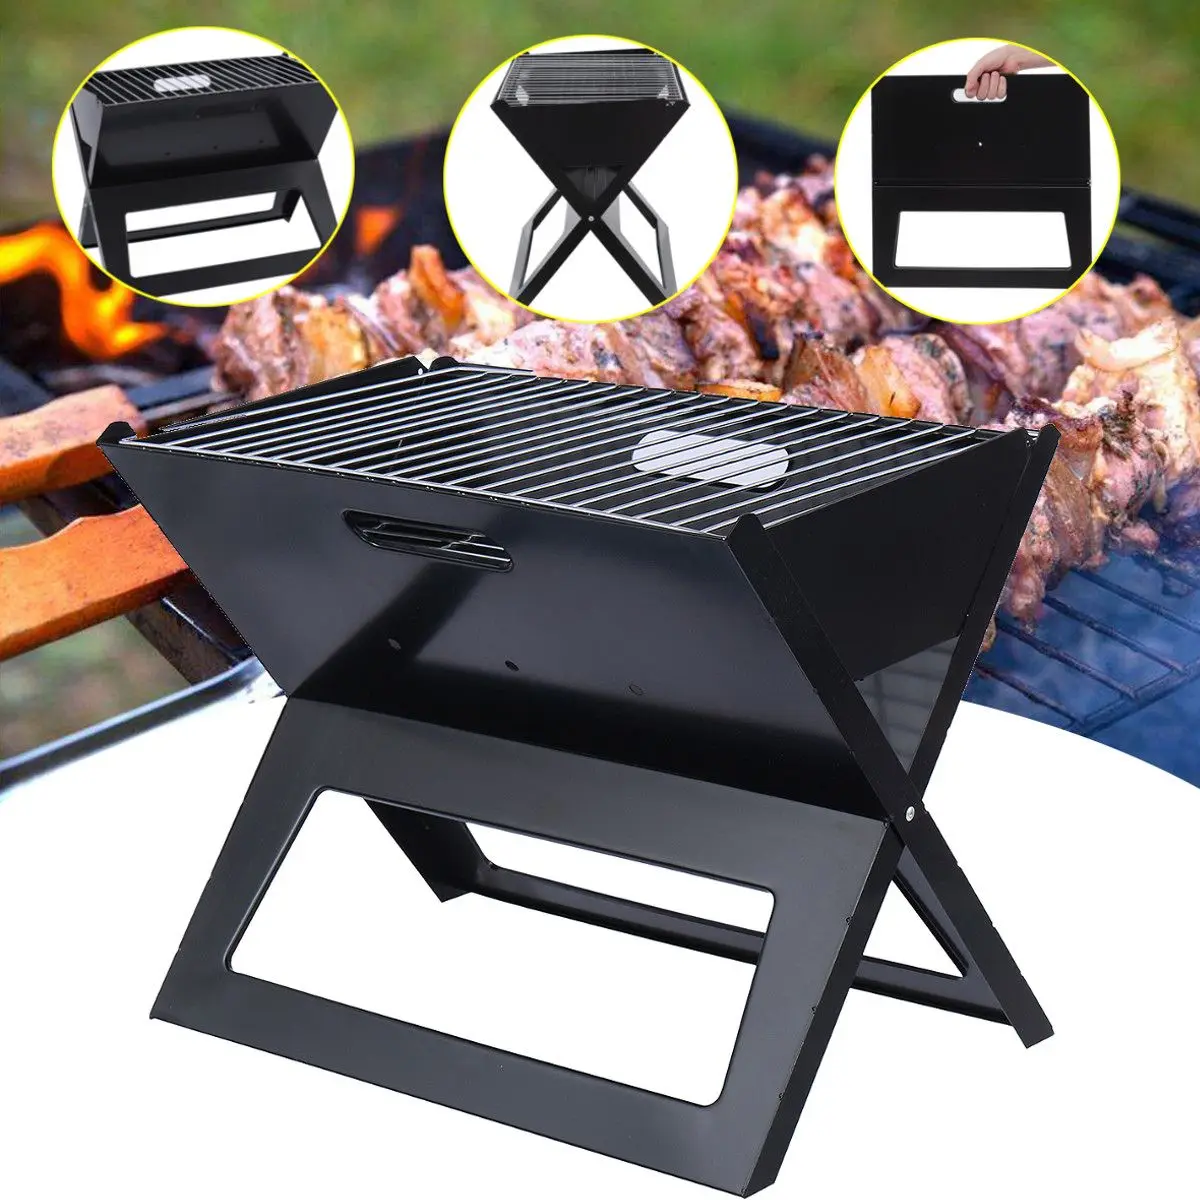 Portable Folding Charcoal Barbecue Grill Travel Picnic Camping Outdoor Stove ONE 